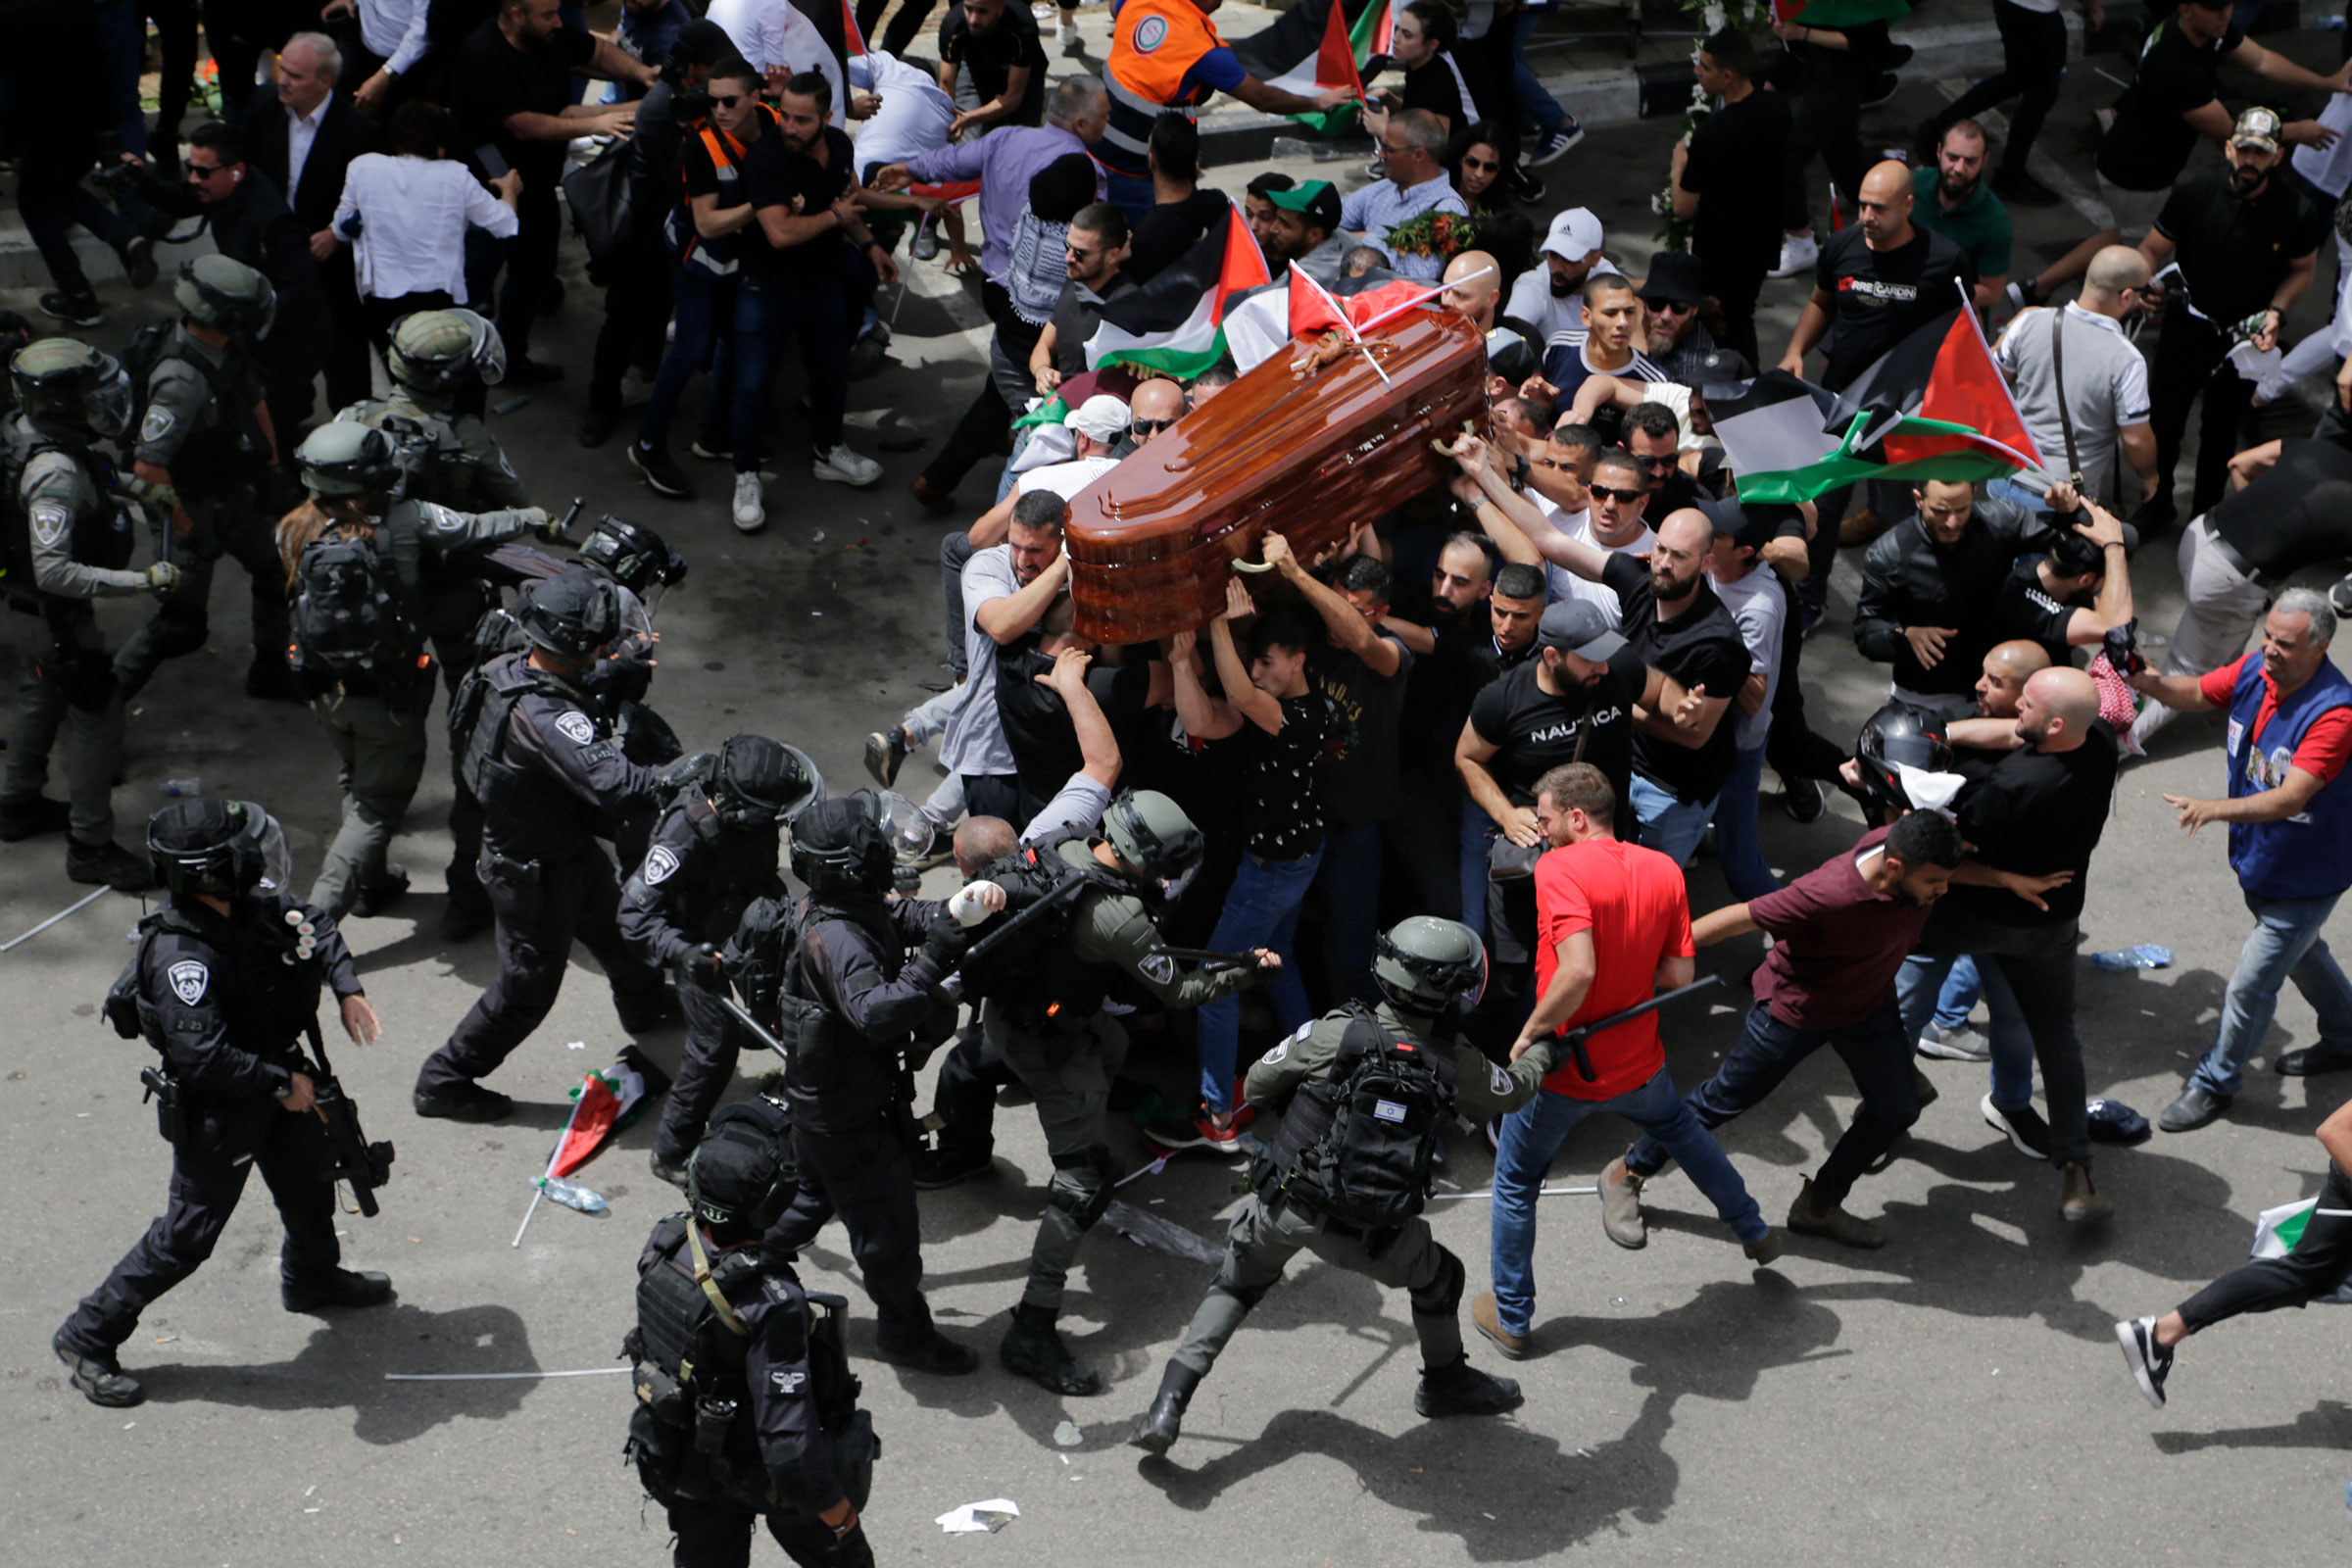 Israeli police confront mourners as they carry the casket of slain Al Jazeera veteran journalist Shireen Abu Akleh during her funeral in east Jerusalem, on May 13. Abu Akleh, a Palestinian-American reporter who covered the Mideast conflict for more than 25 years, was shot dead during an Israeli military raid in the West Bank town of Jenin. (Maya Levin—AP)